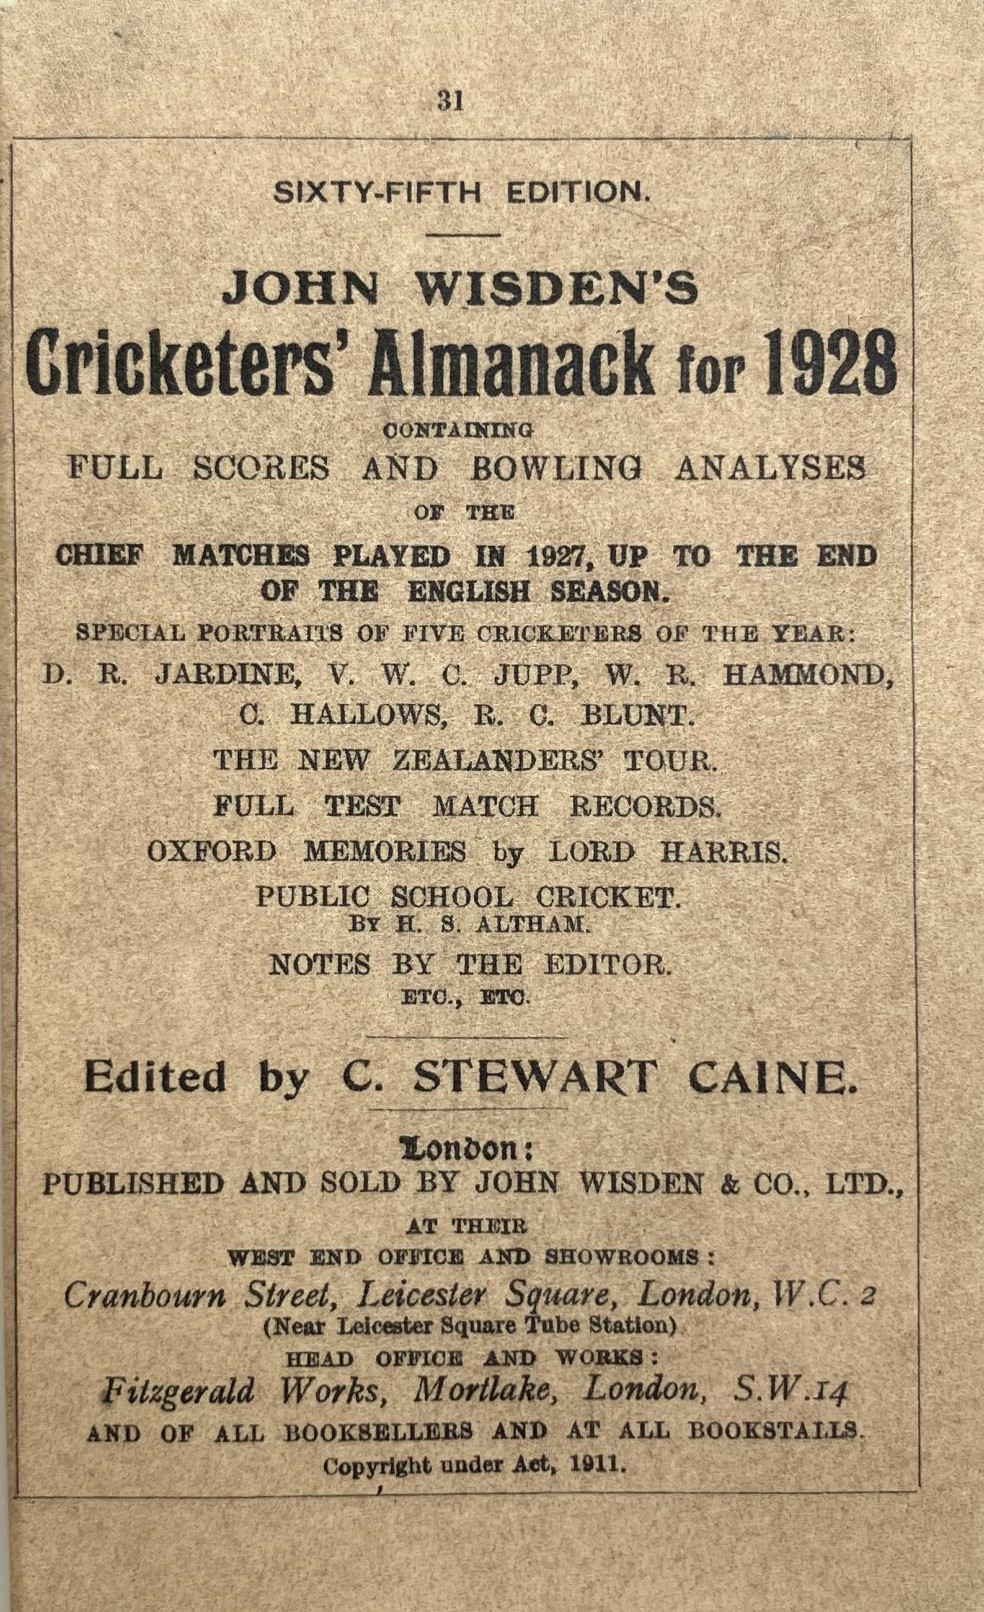 A Wisden Cricketers' Almanack, 1928 Provenance:  From the Harry Brewer Cricket Memorabilia - Image 3 of 4